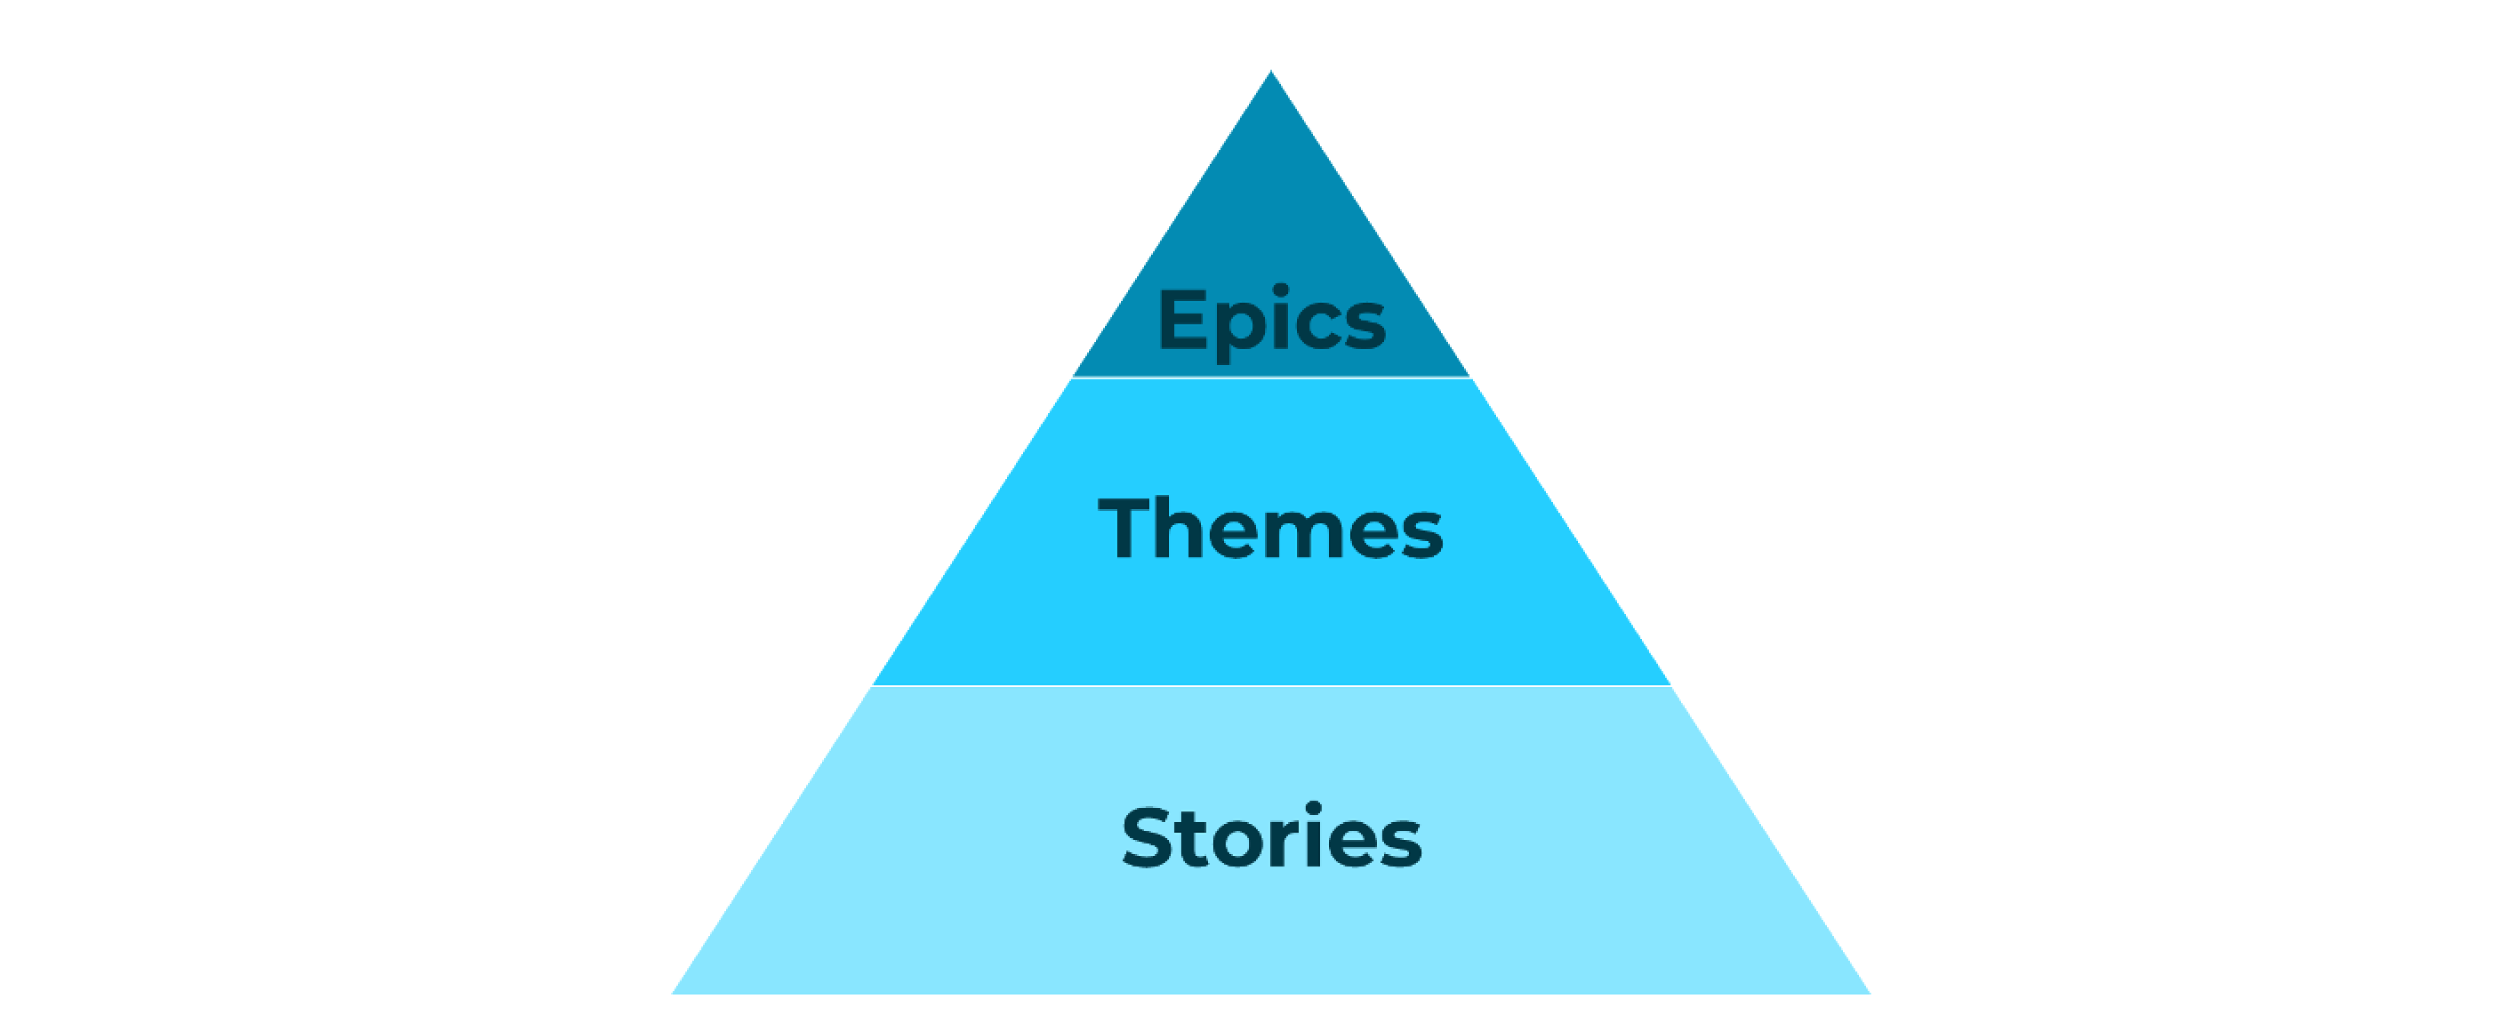 A diagram in the shame of a pyramid. Epics are at the top of the pyramid, themes in the middle, and stories at the bottom.